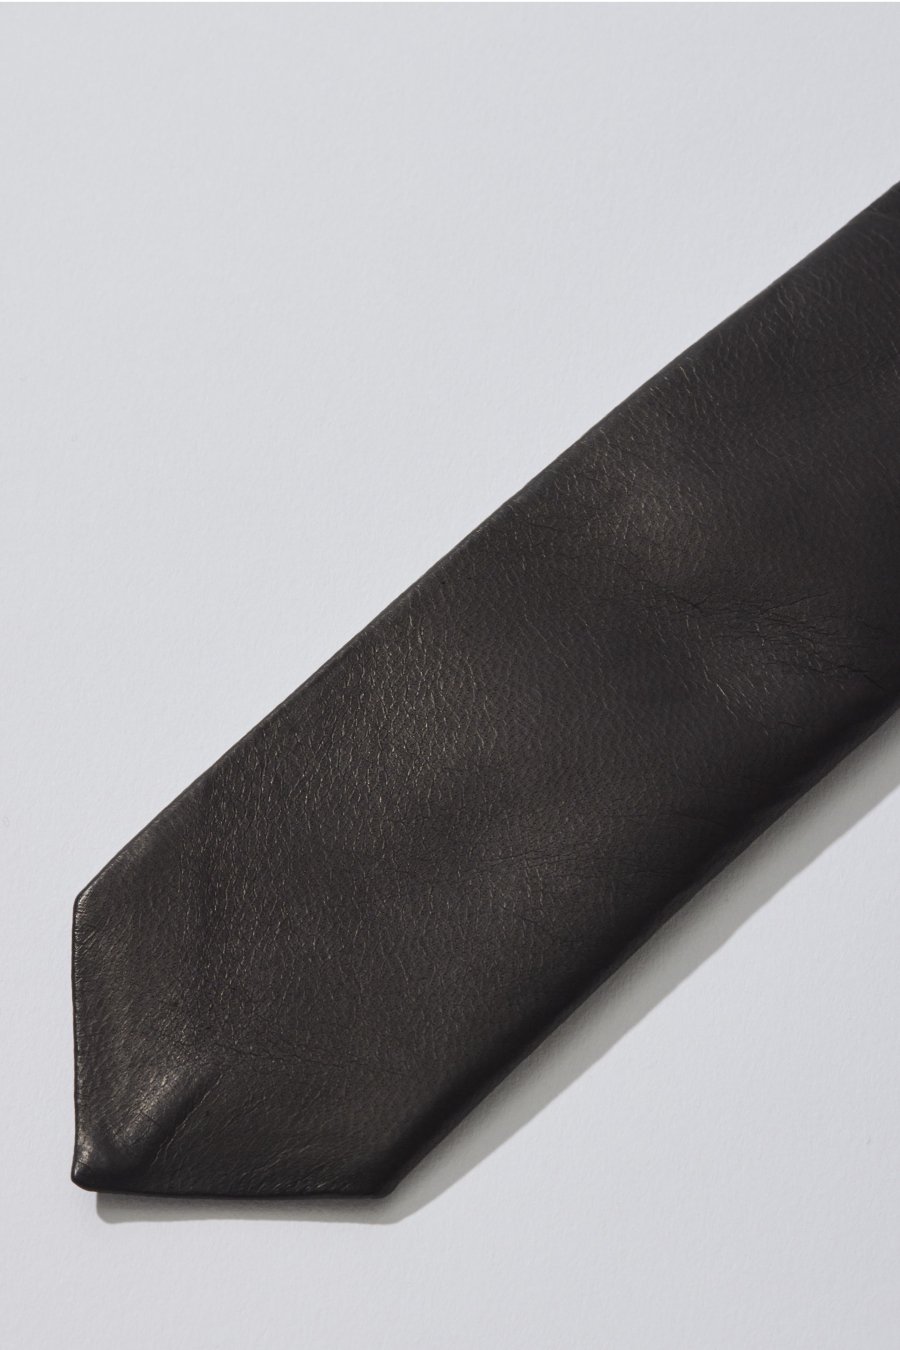 LITTLEBIG  Leather Narrow Tie<img class='new_mark_img2' src='https://img.shop-pro.jp/img/new/icons53.gif' style='border:none;display:inline;margin:0px;padding:0px;width:auto;' />